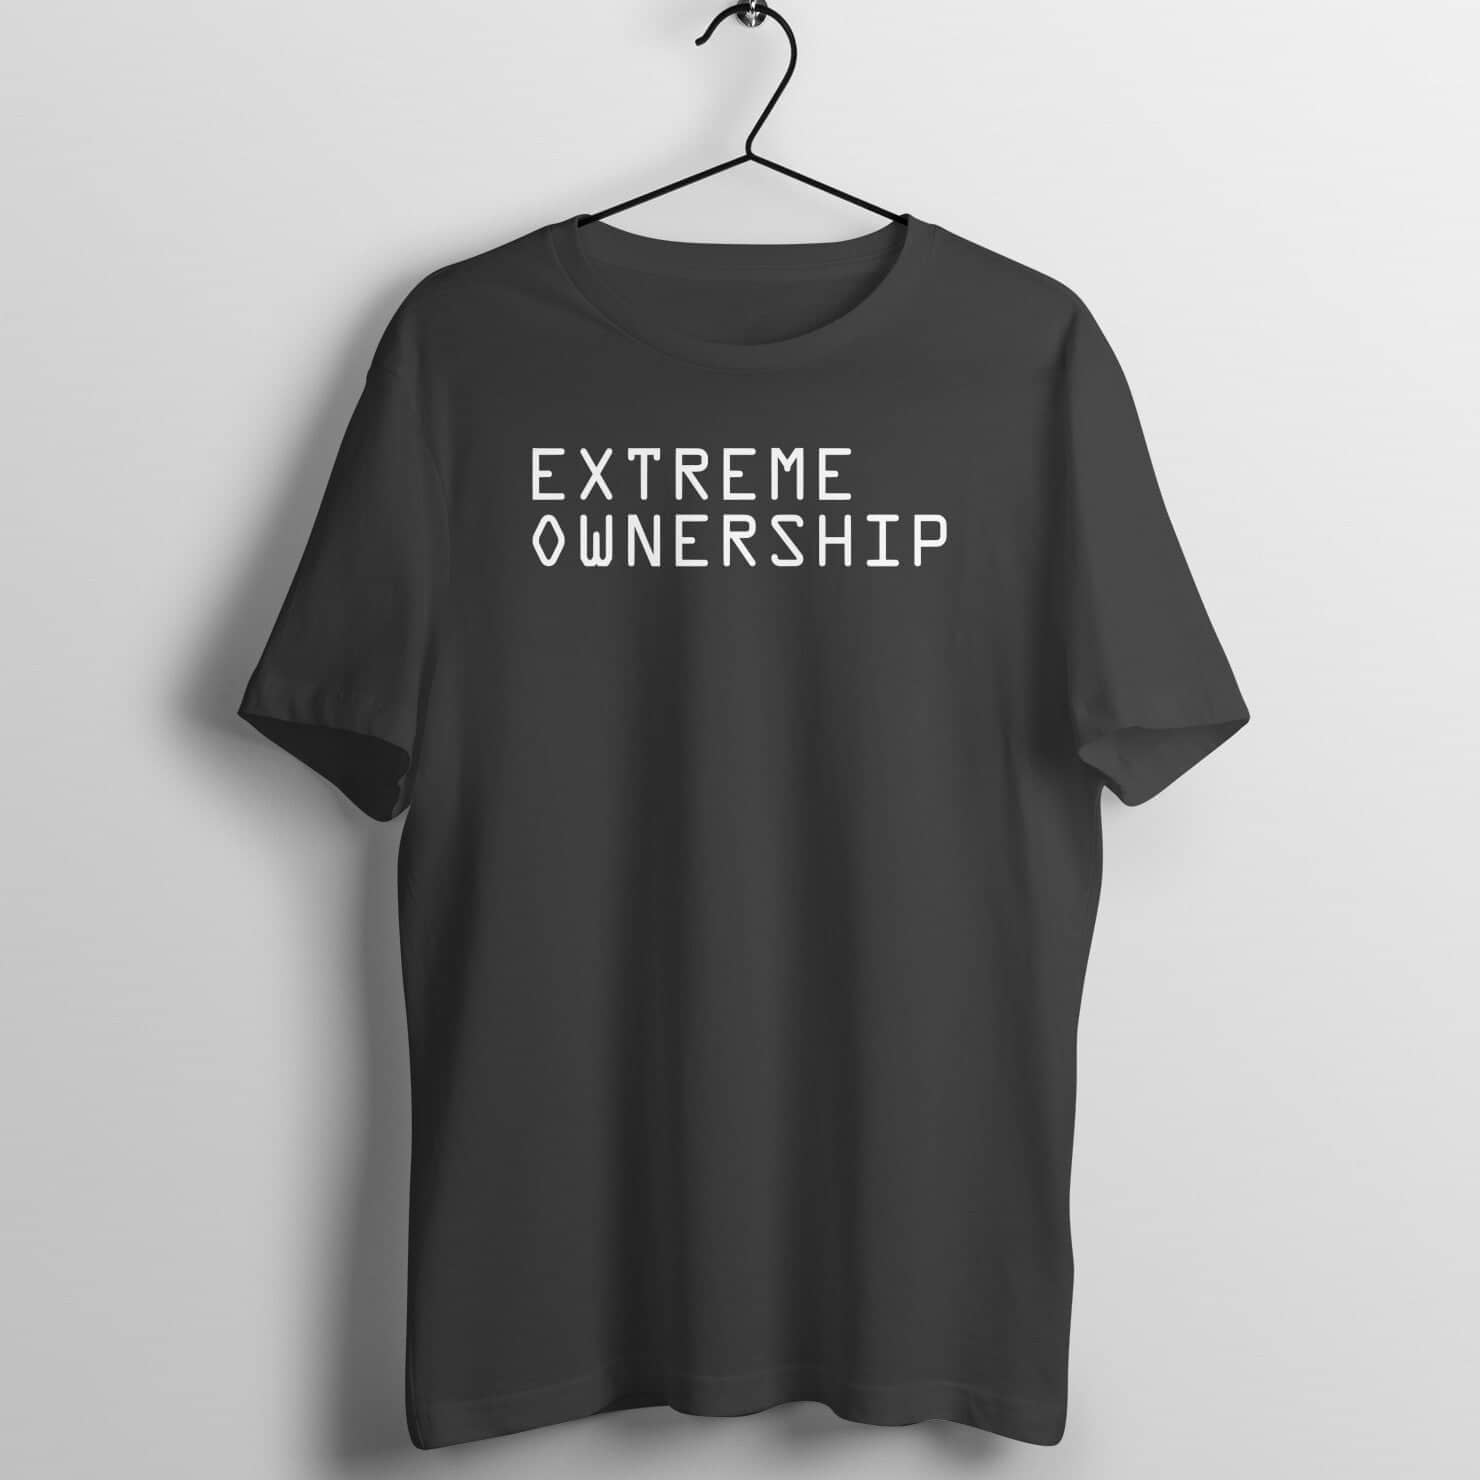 Extreme Ownership Exclusive Black T Shirt for Men and Women freeshipping - Catch My Drift India